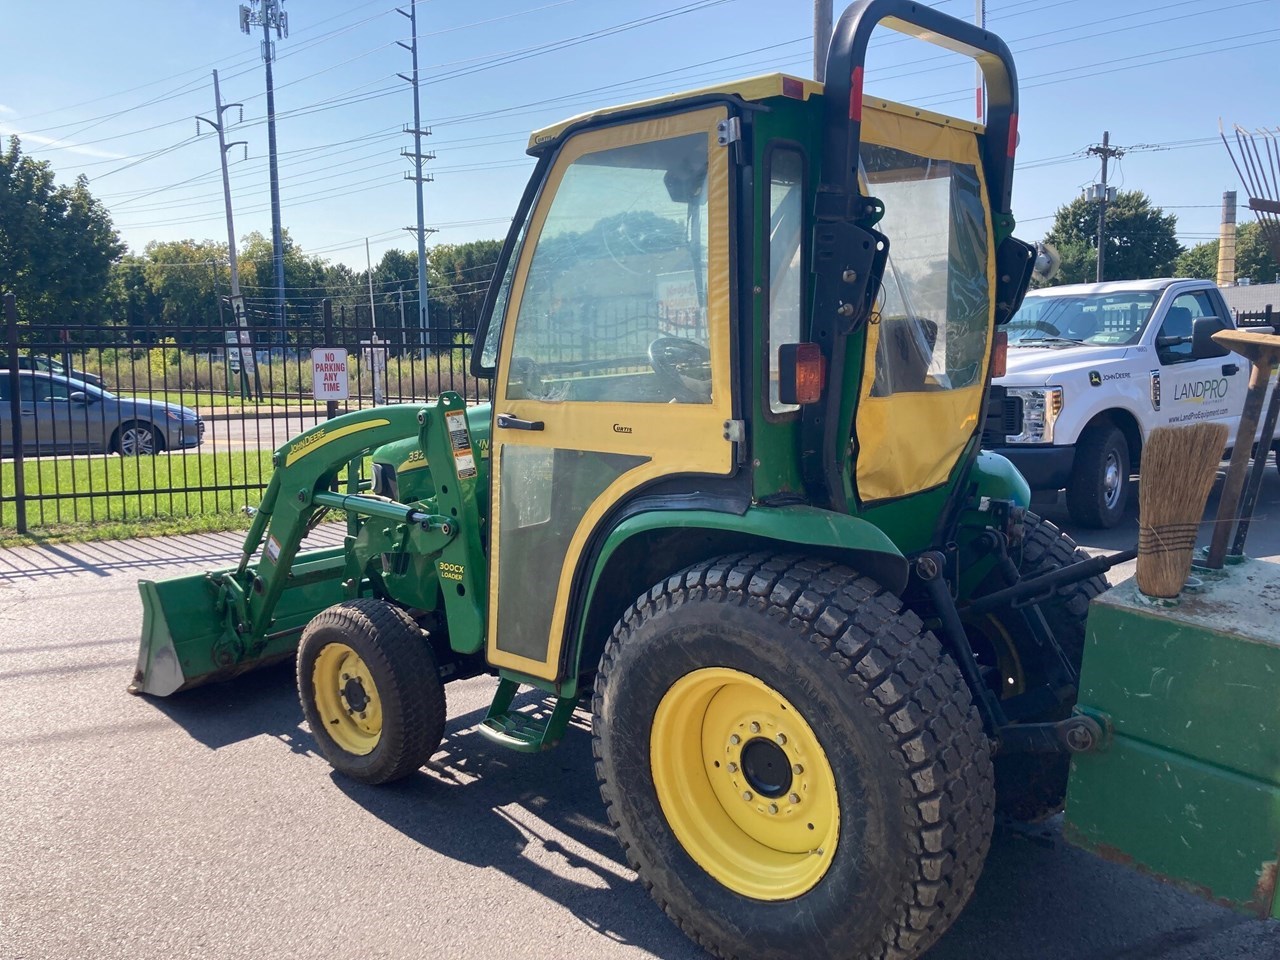 2007 John Deere 3320 Tractor - Compact Utility For Sale